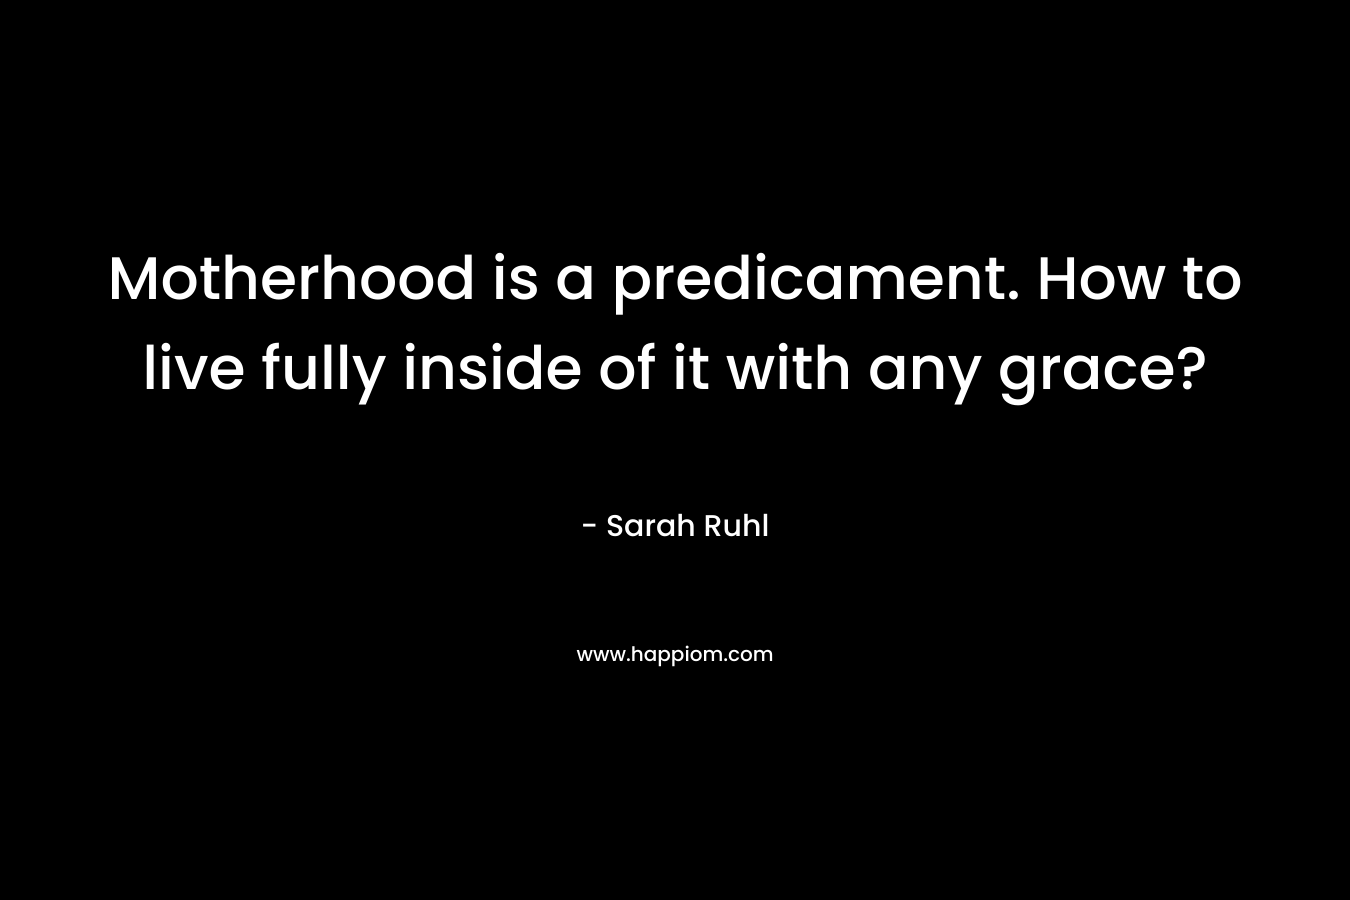 Motherhood is a predicament. How to live fully inside of it with any grace? – Sarah Ruhl